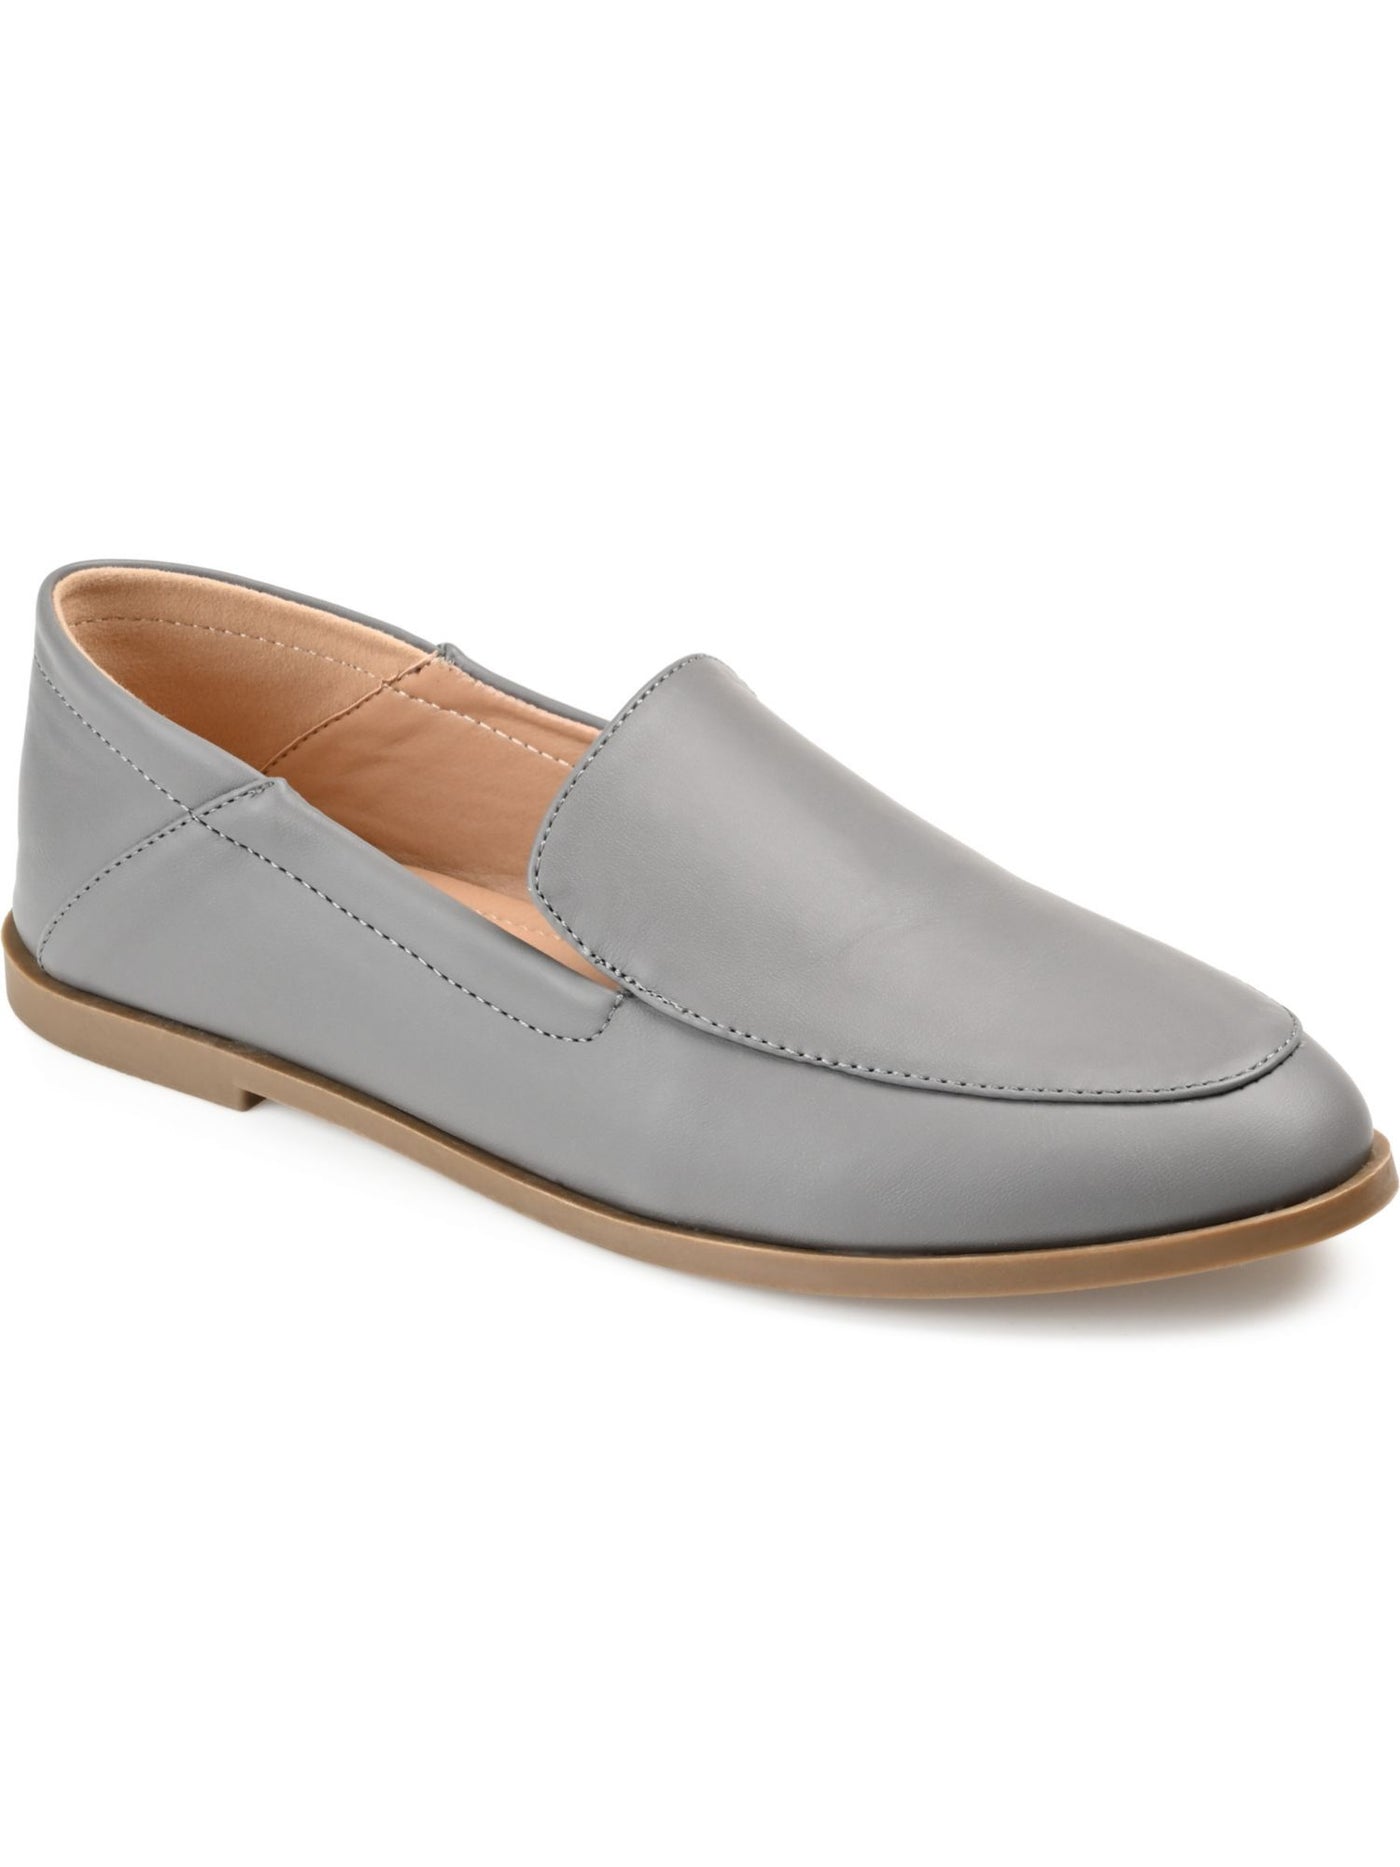 JOURNEE COLLECTION Womens Gray Cushioned Corinne Almond Toe Slip On Loafers Shoes 9.5